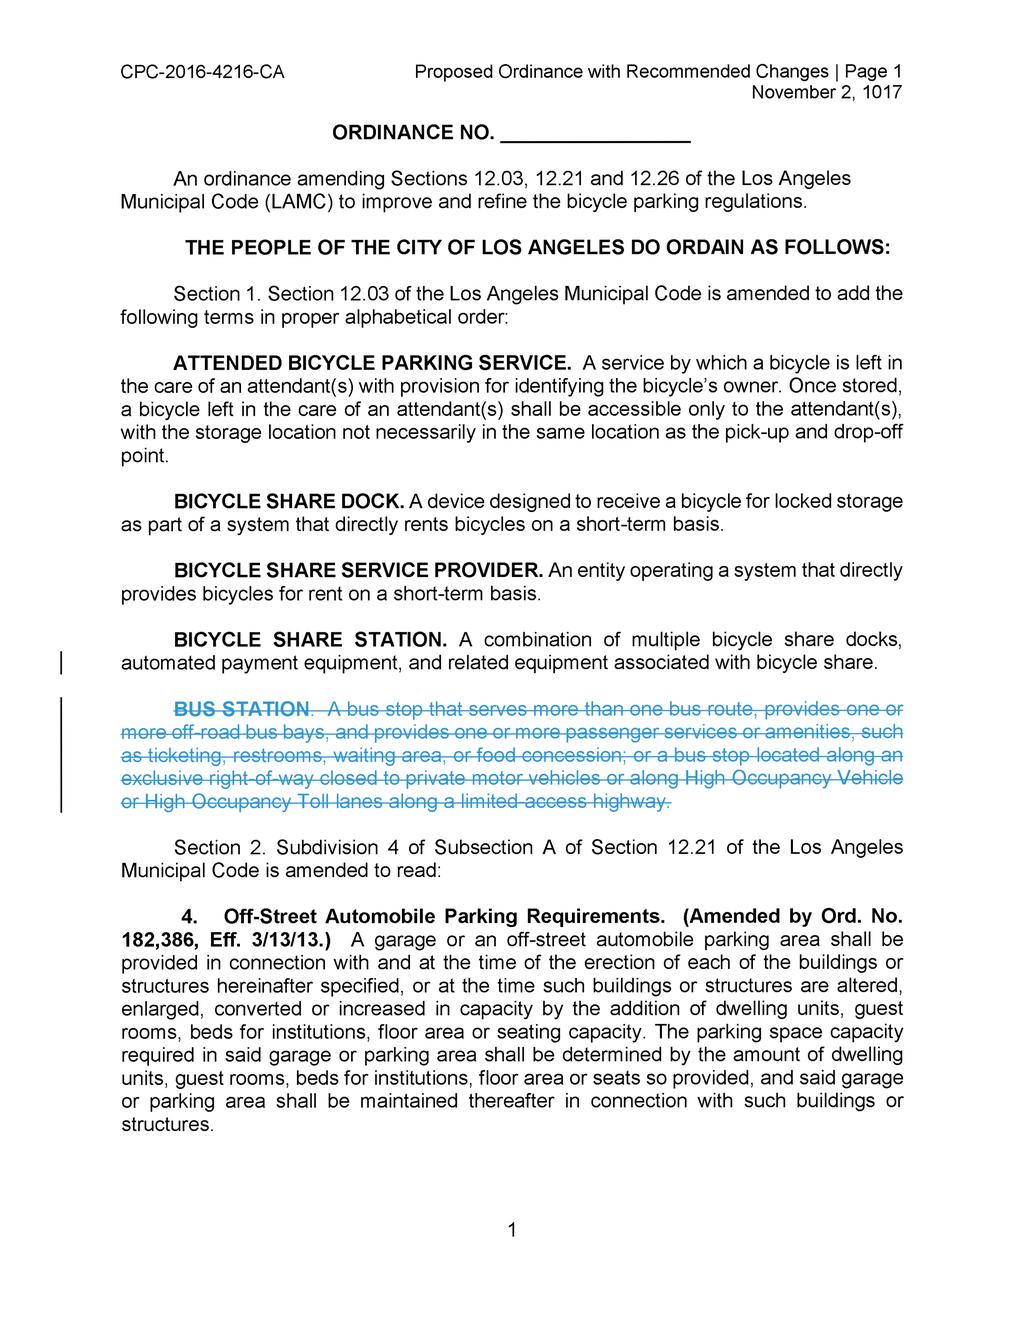 CPC-2016-4216-CA Proposed Ordinance with Recommended Changes Page 1 ORDINANCE NO. An ordinance amending Sections 12.03, 12.21 and 12.